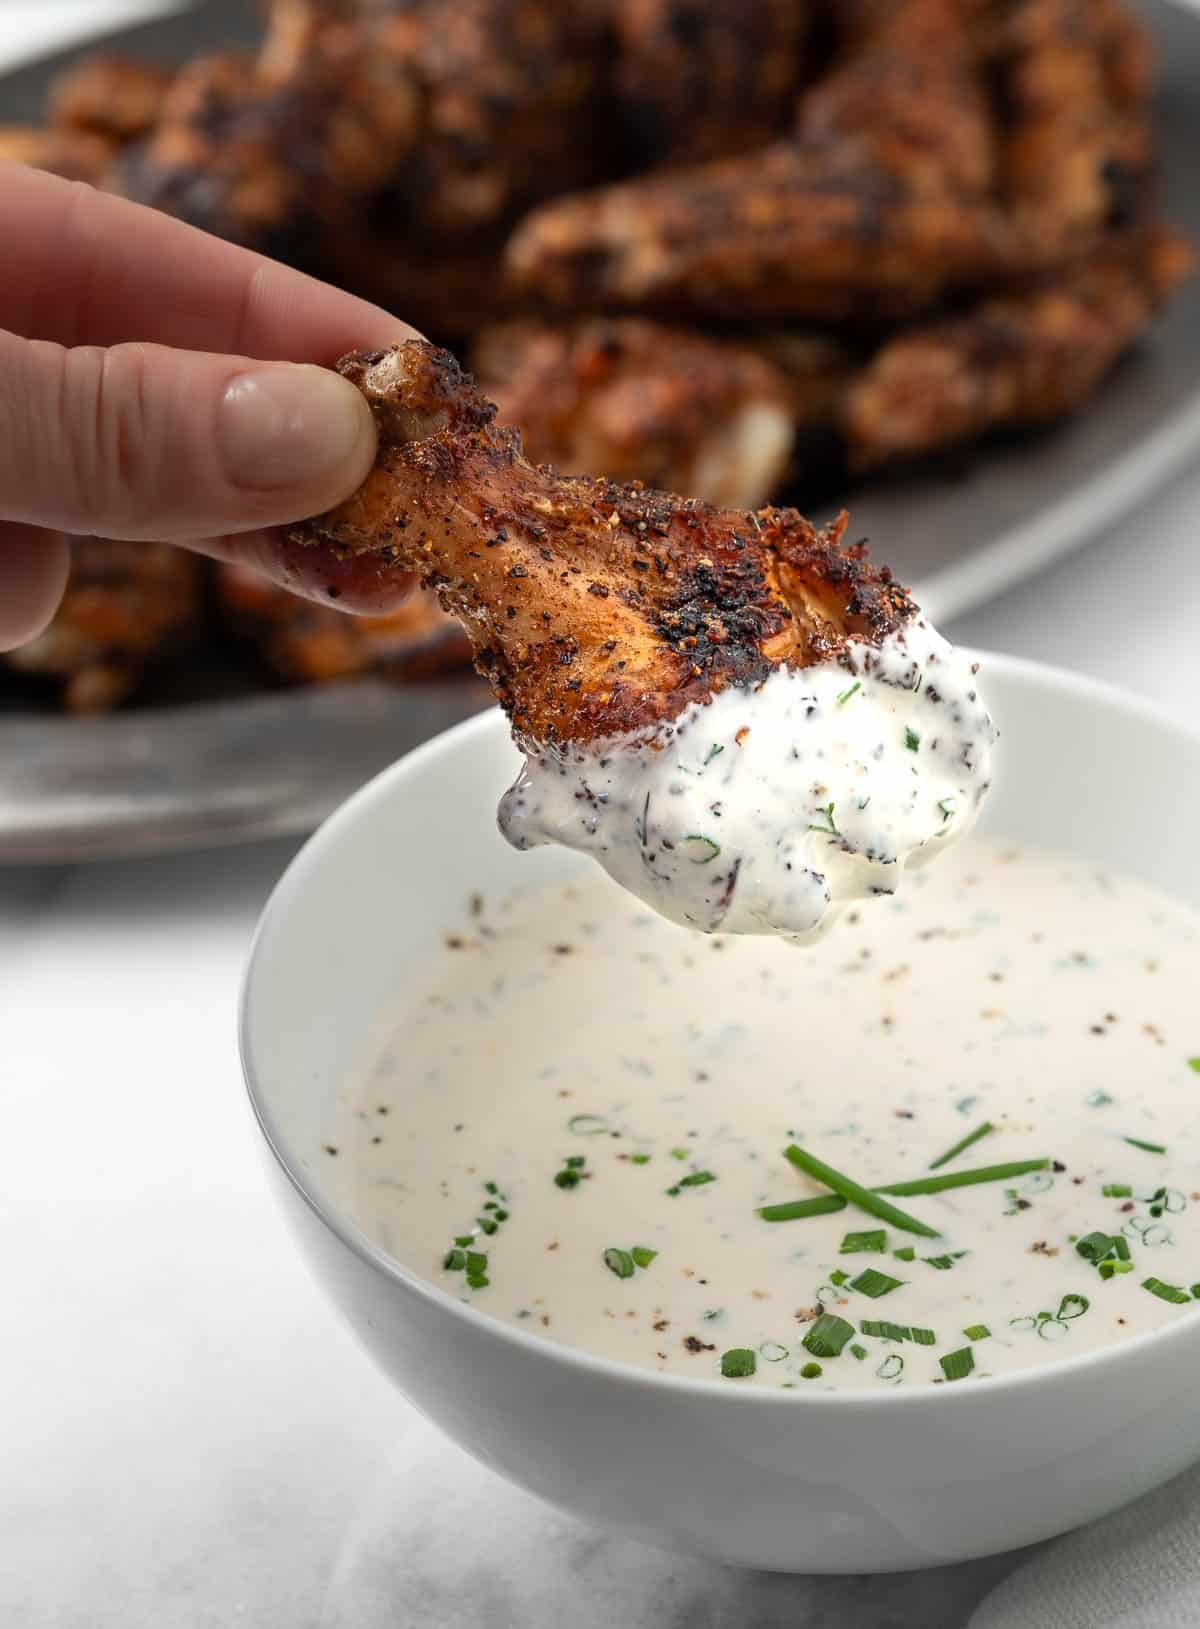 A dry rub chicken wing dunked into a bowl of homemade ranch dressing